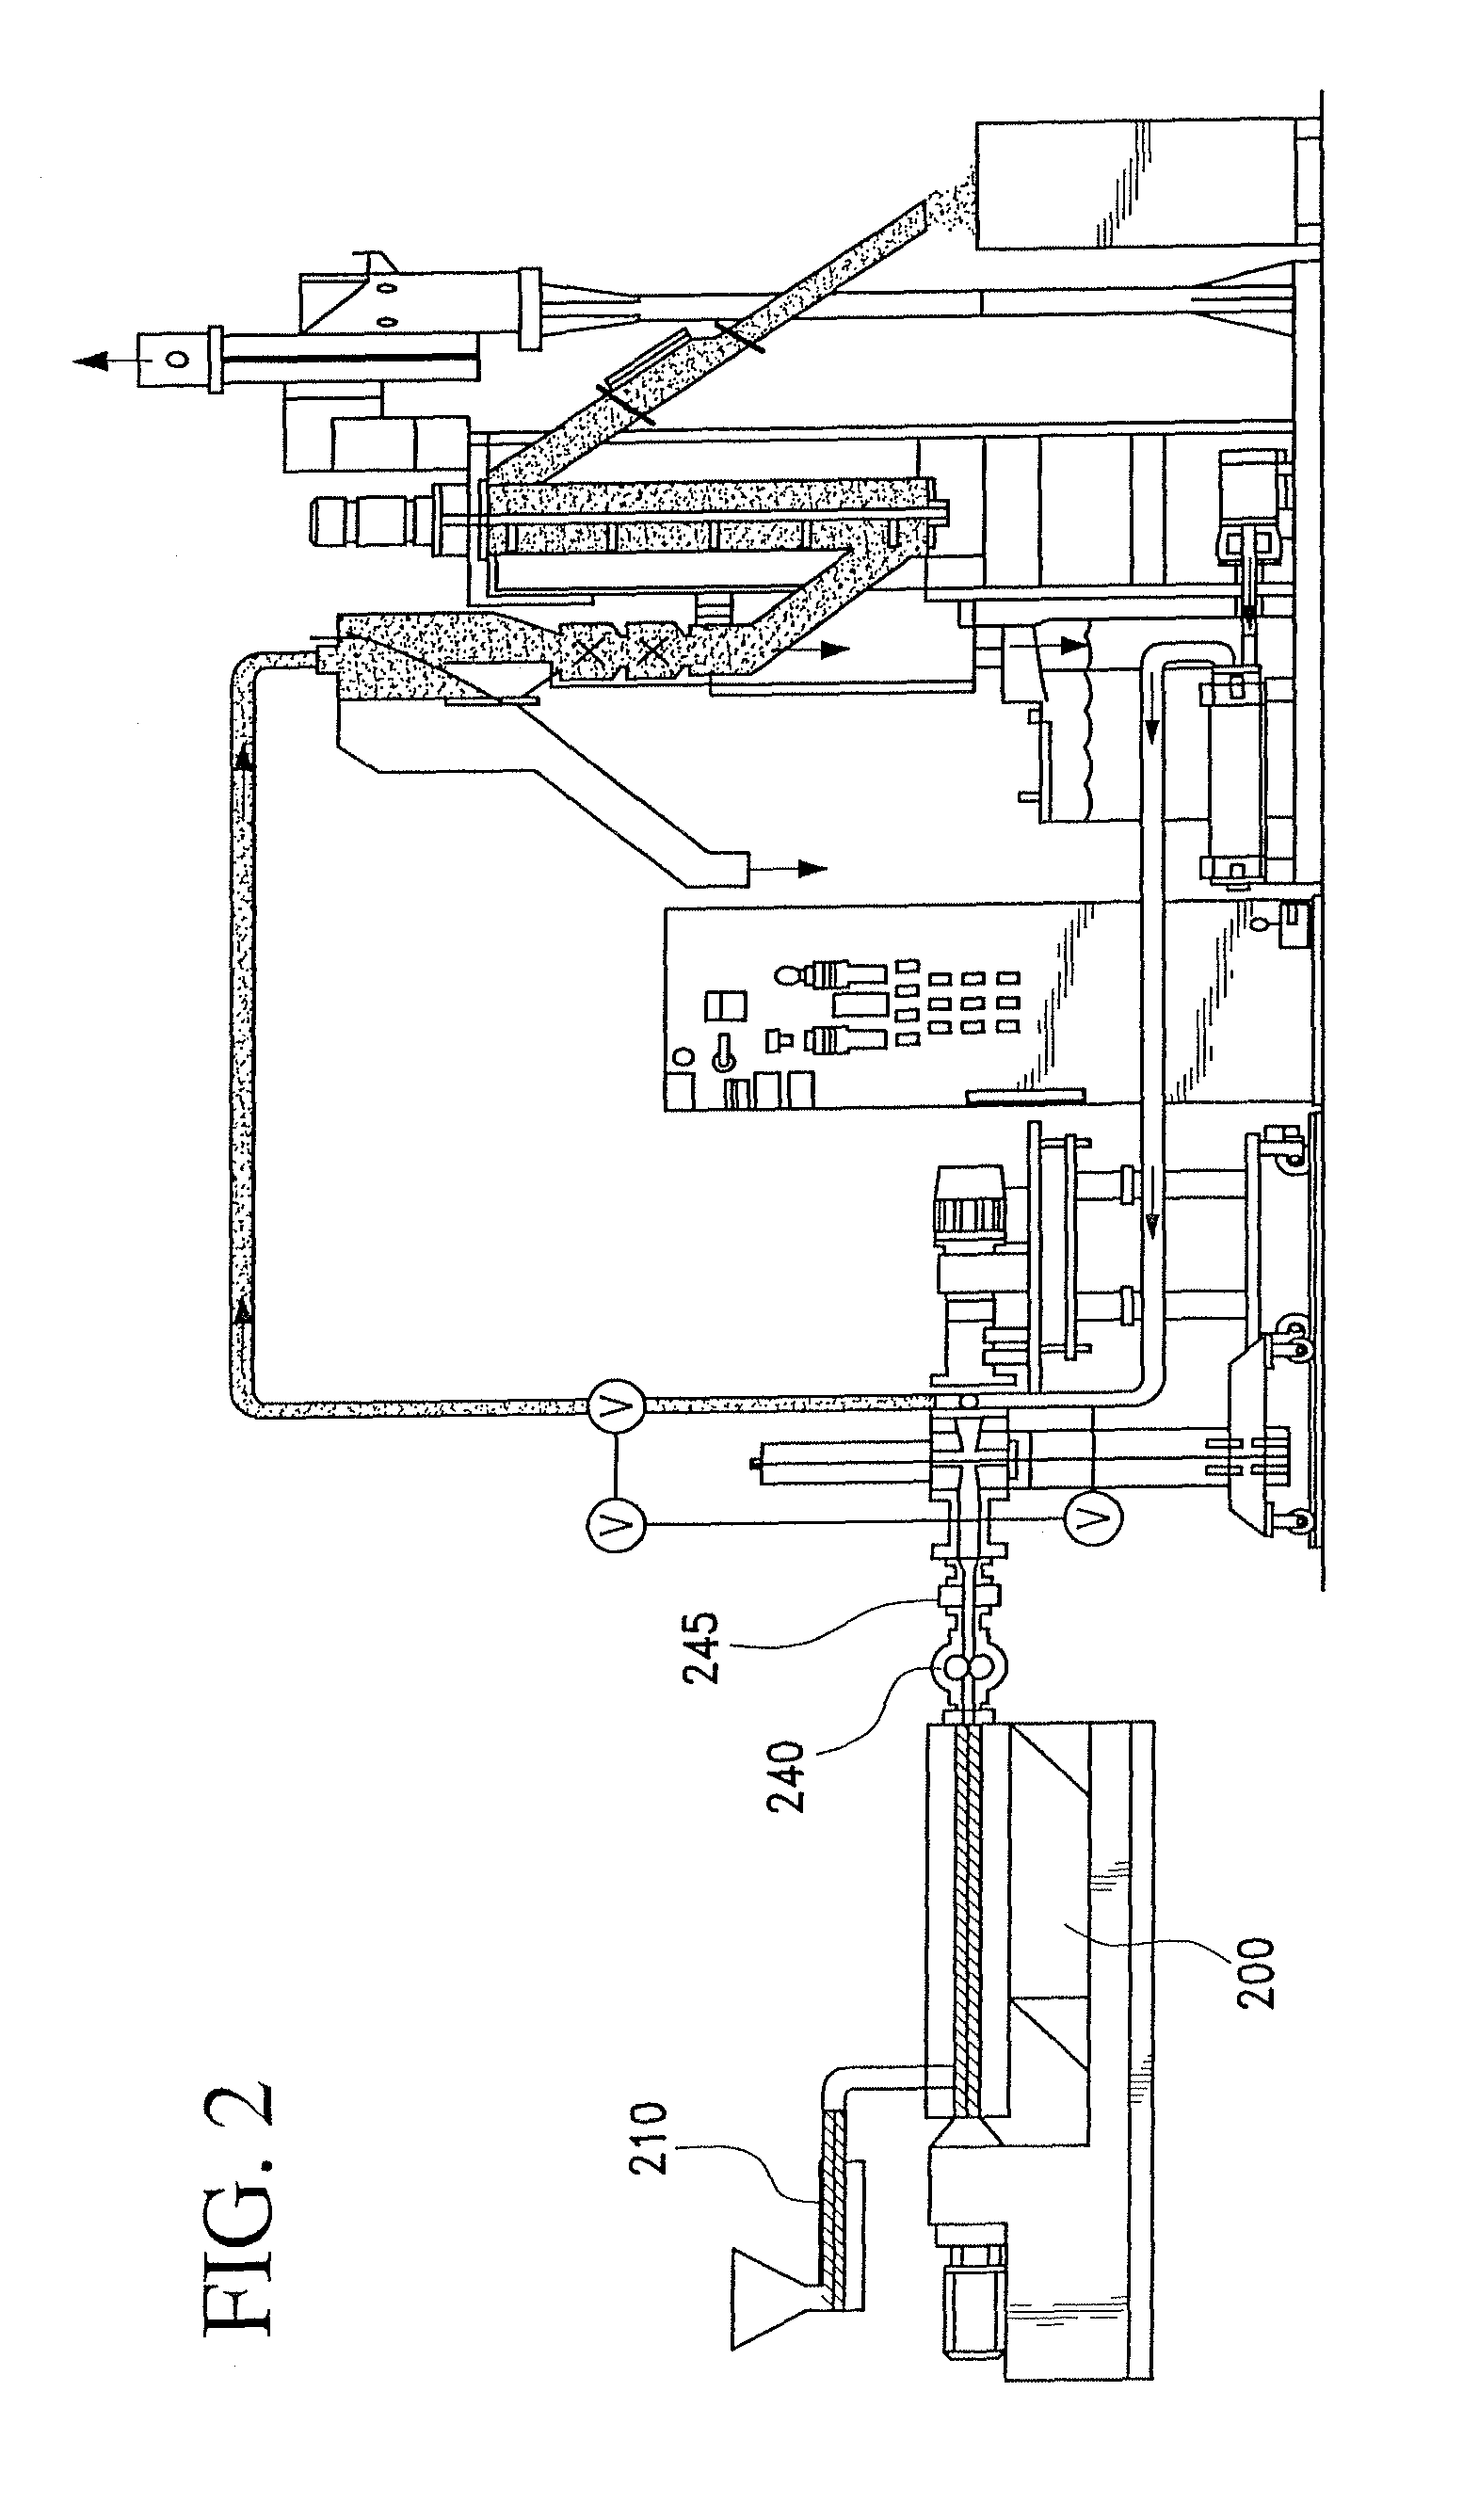 Apparatus and method for controlled pelletization processing